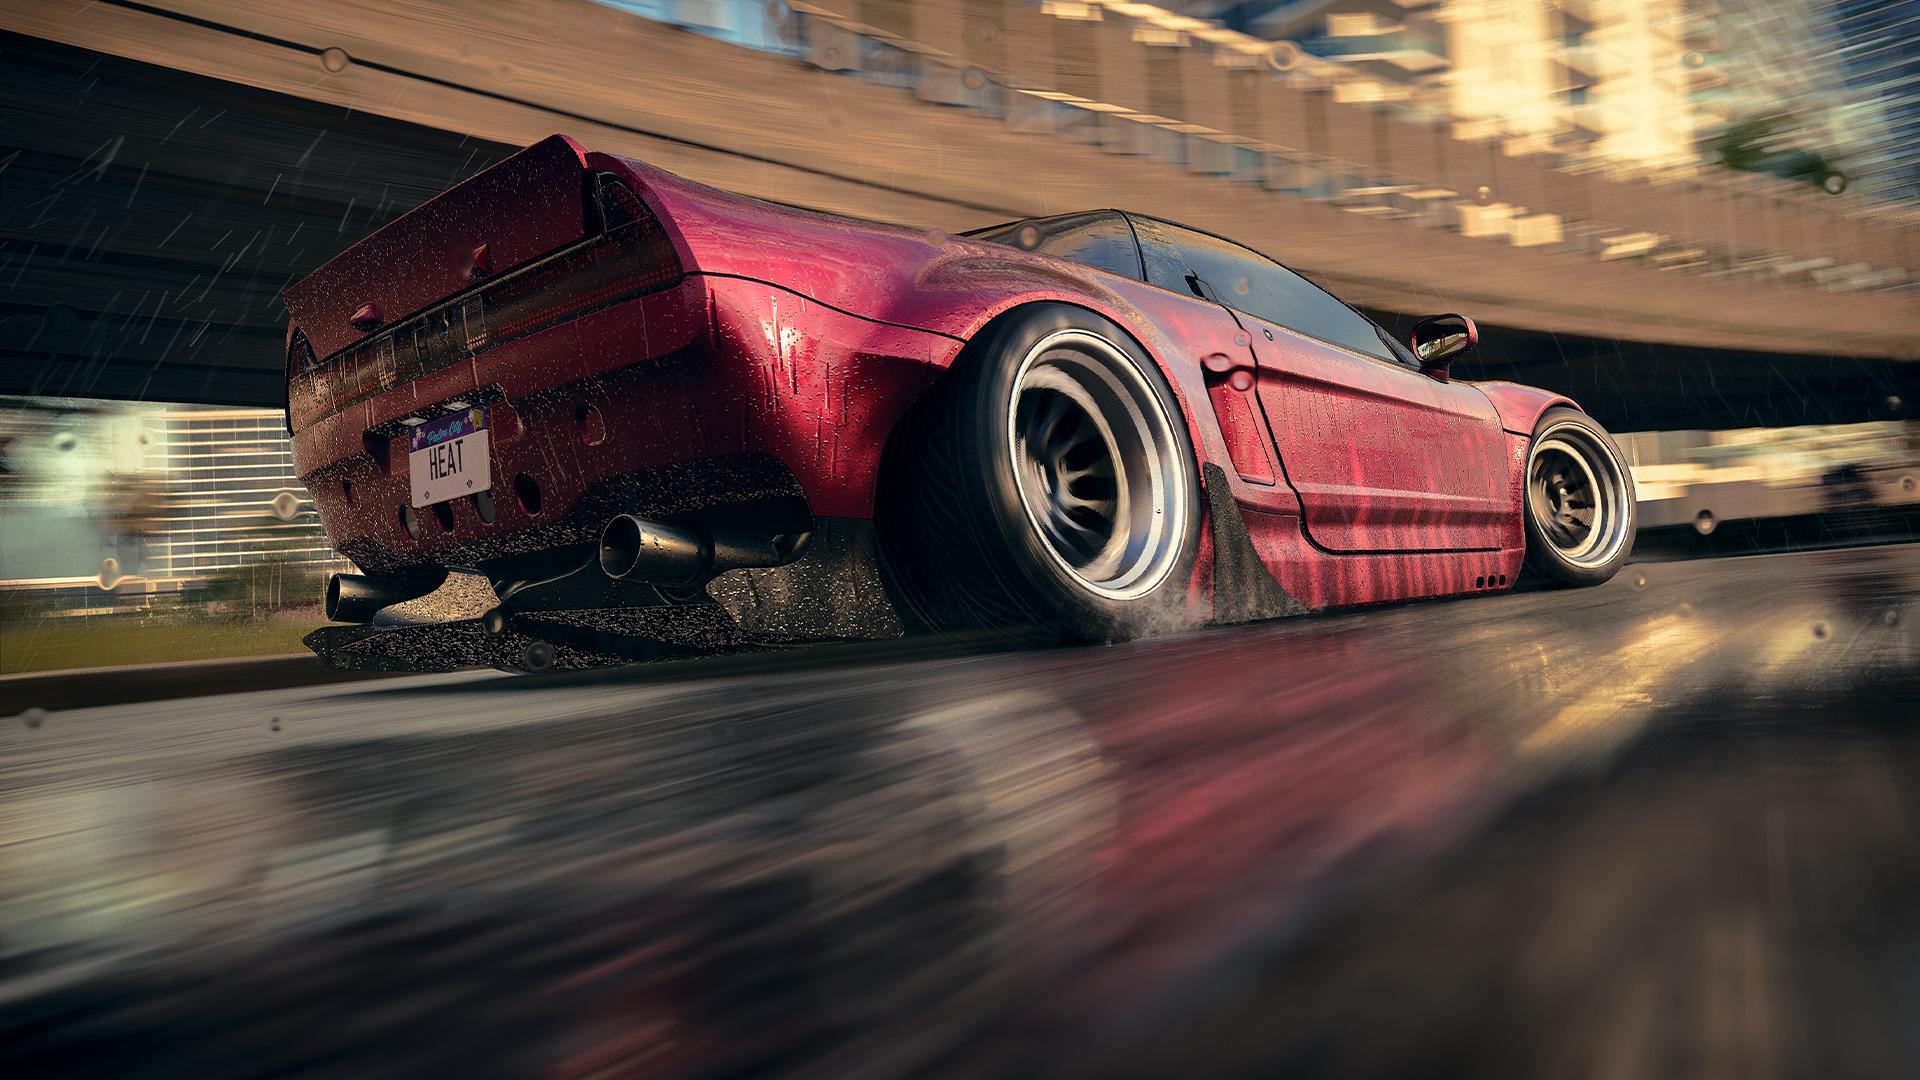 EA's Need for Speed game